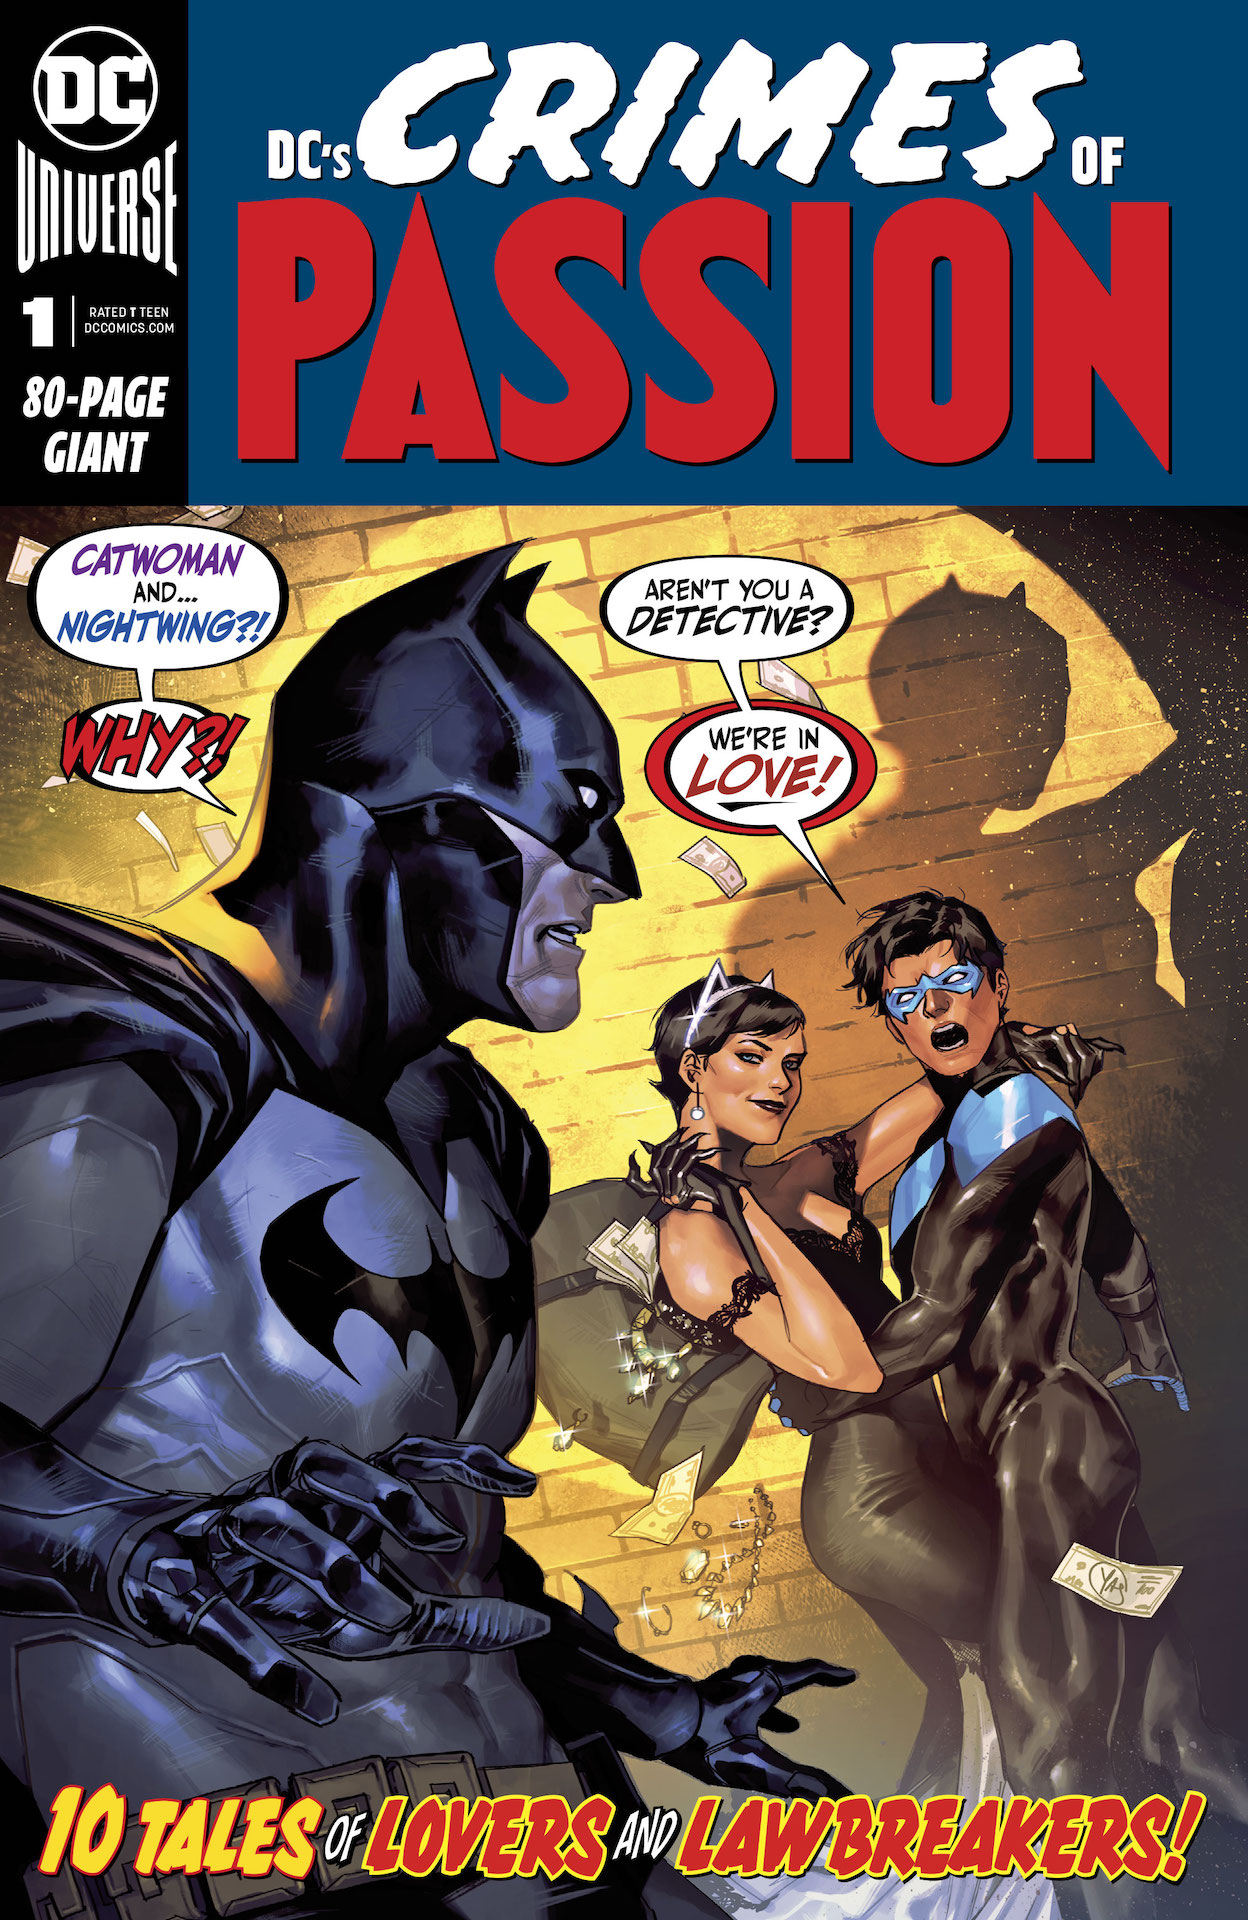 DC Preview: DC Crimes Of Passion #1